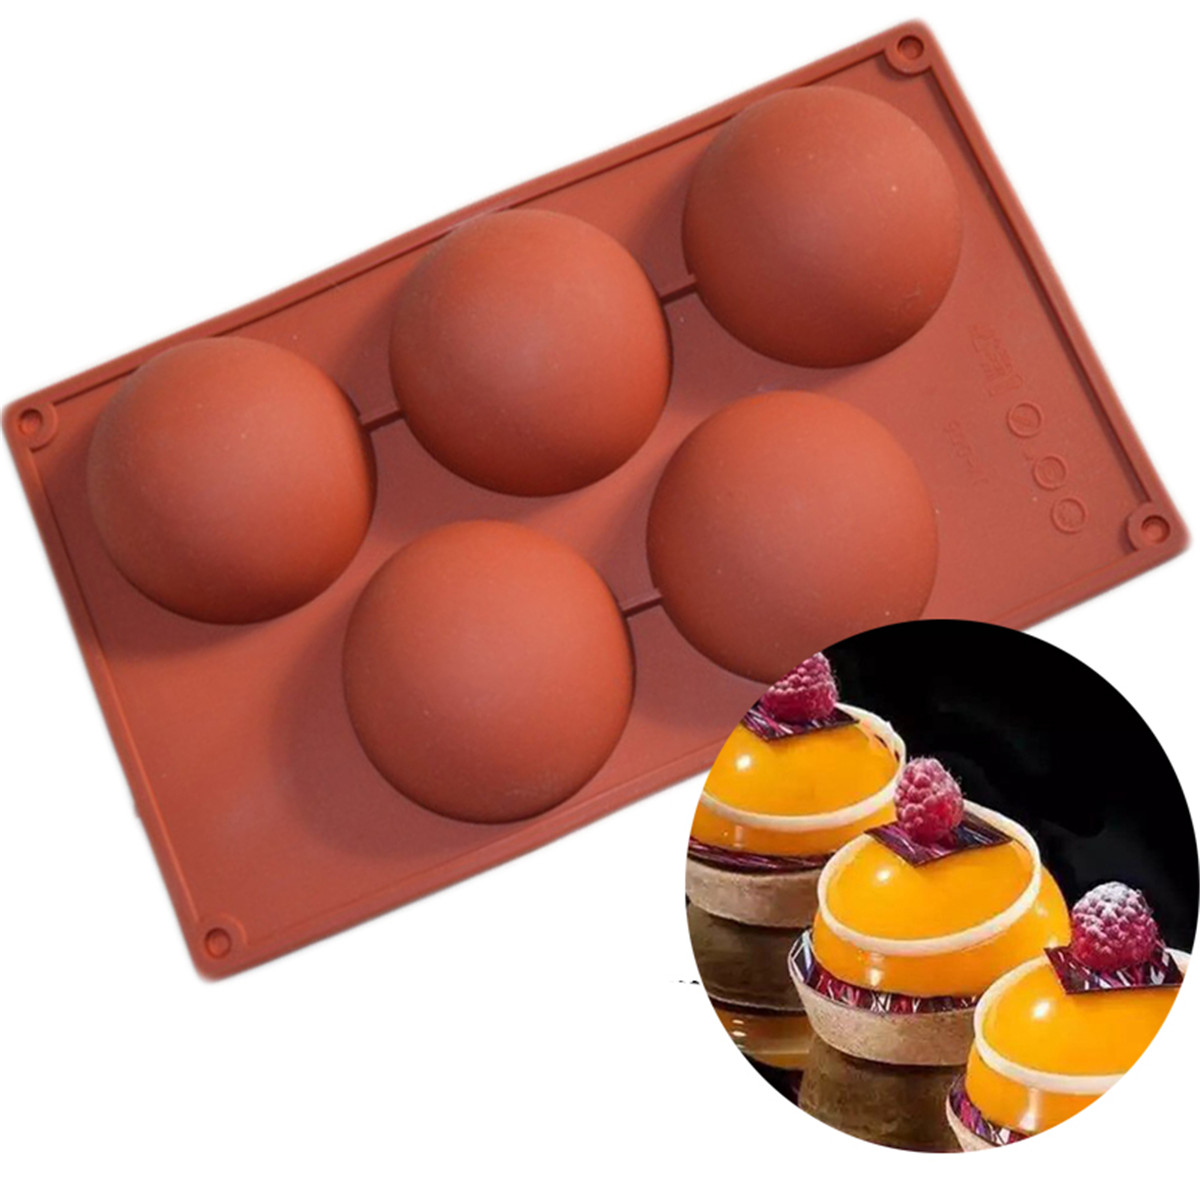 5-Cavity-Silicone-Bread-Cake-Chocolate-Fondant-Mold-Mousse-Pastry-Baking-Tools-1247075-3